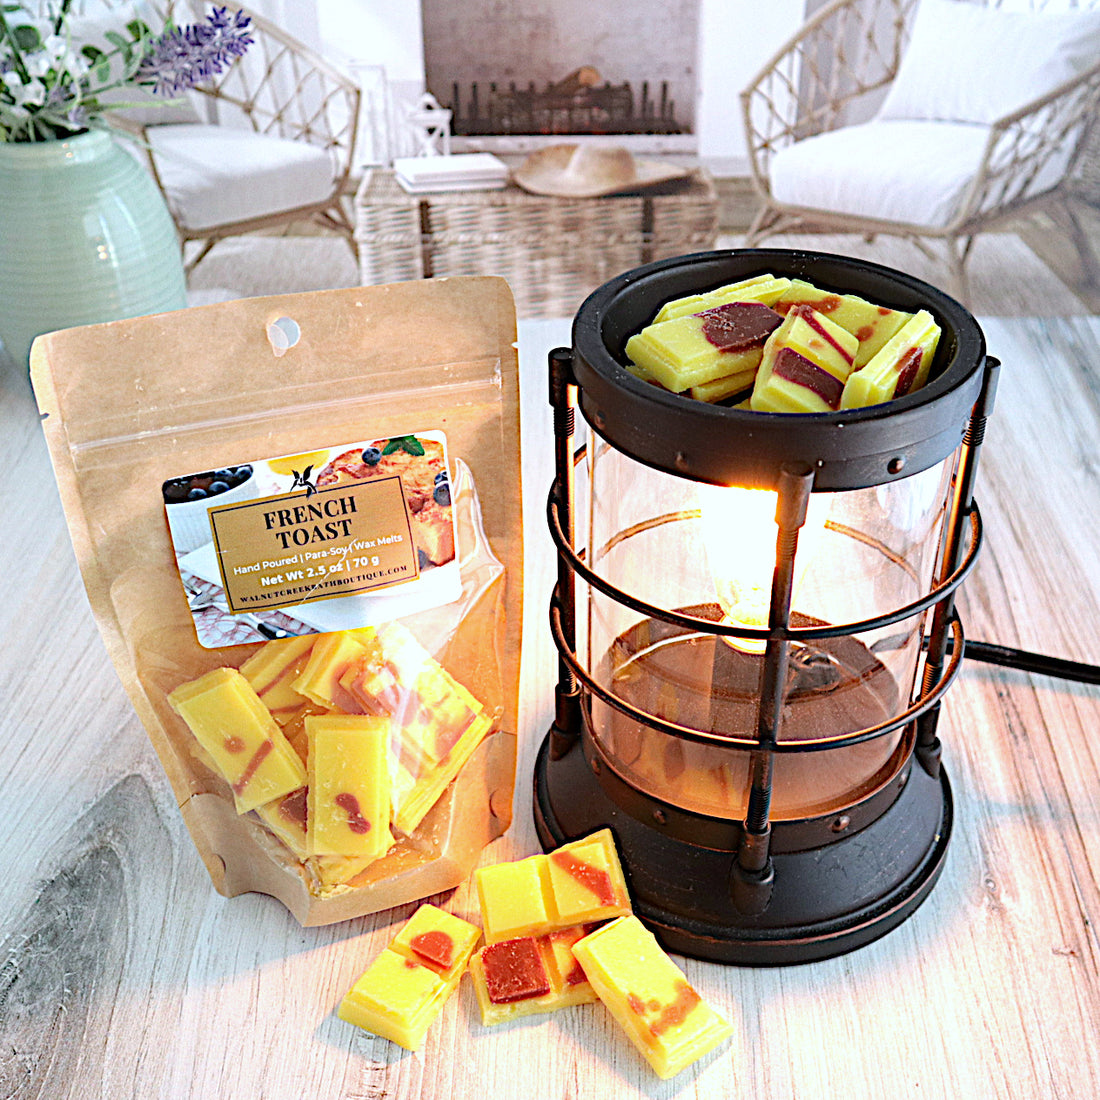 a bag of french toast wax melts are standing next to a lit burner with some of the wax pieces in the cup. there are more wax melt pieces on the table between the bag and the burner. the pieces are yellow in color with some caramel colored drizzles.  this is all sitting on a washed out wooden base with a couple of chairs in the background next to a fireplace 